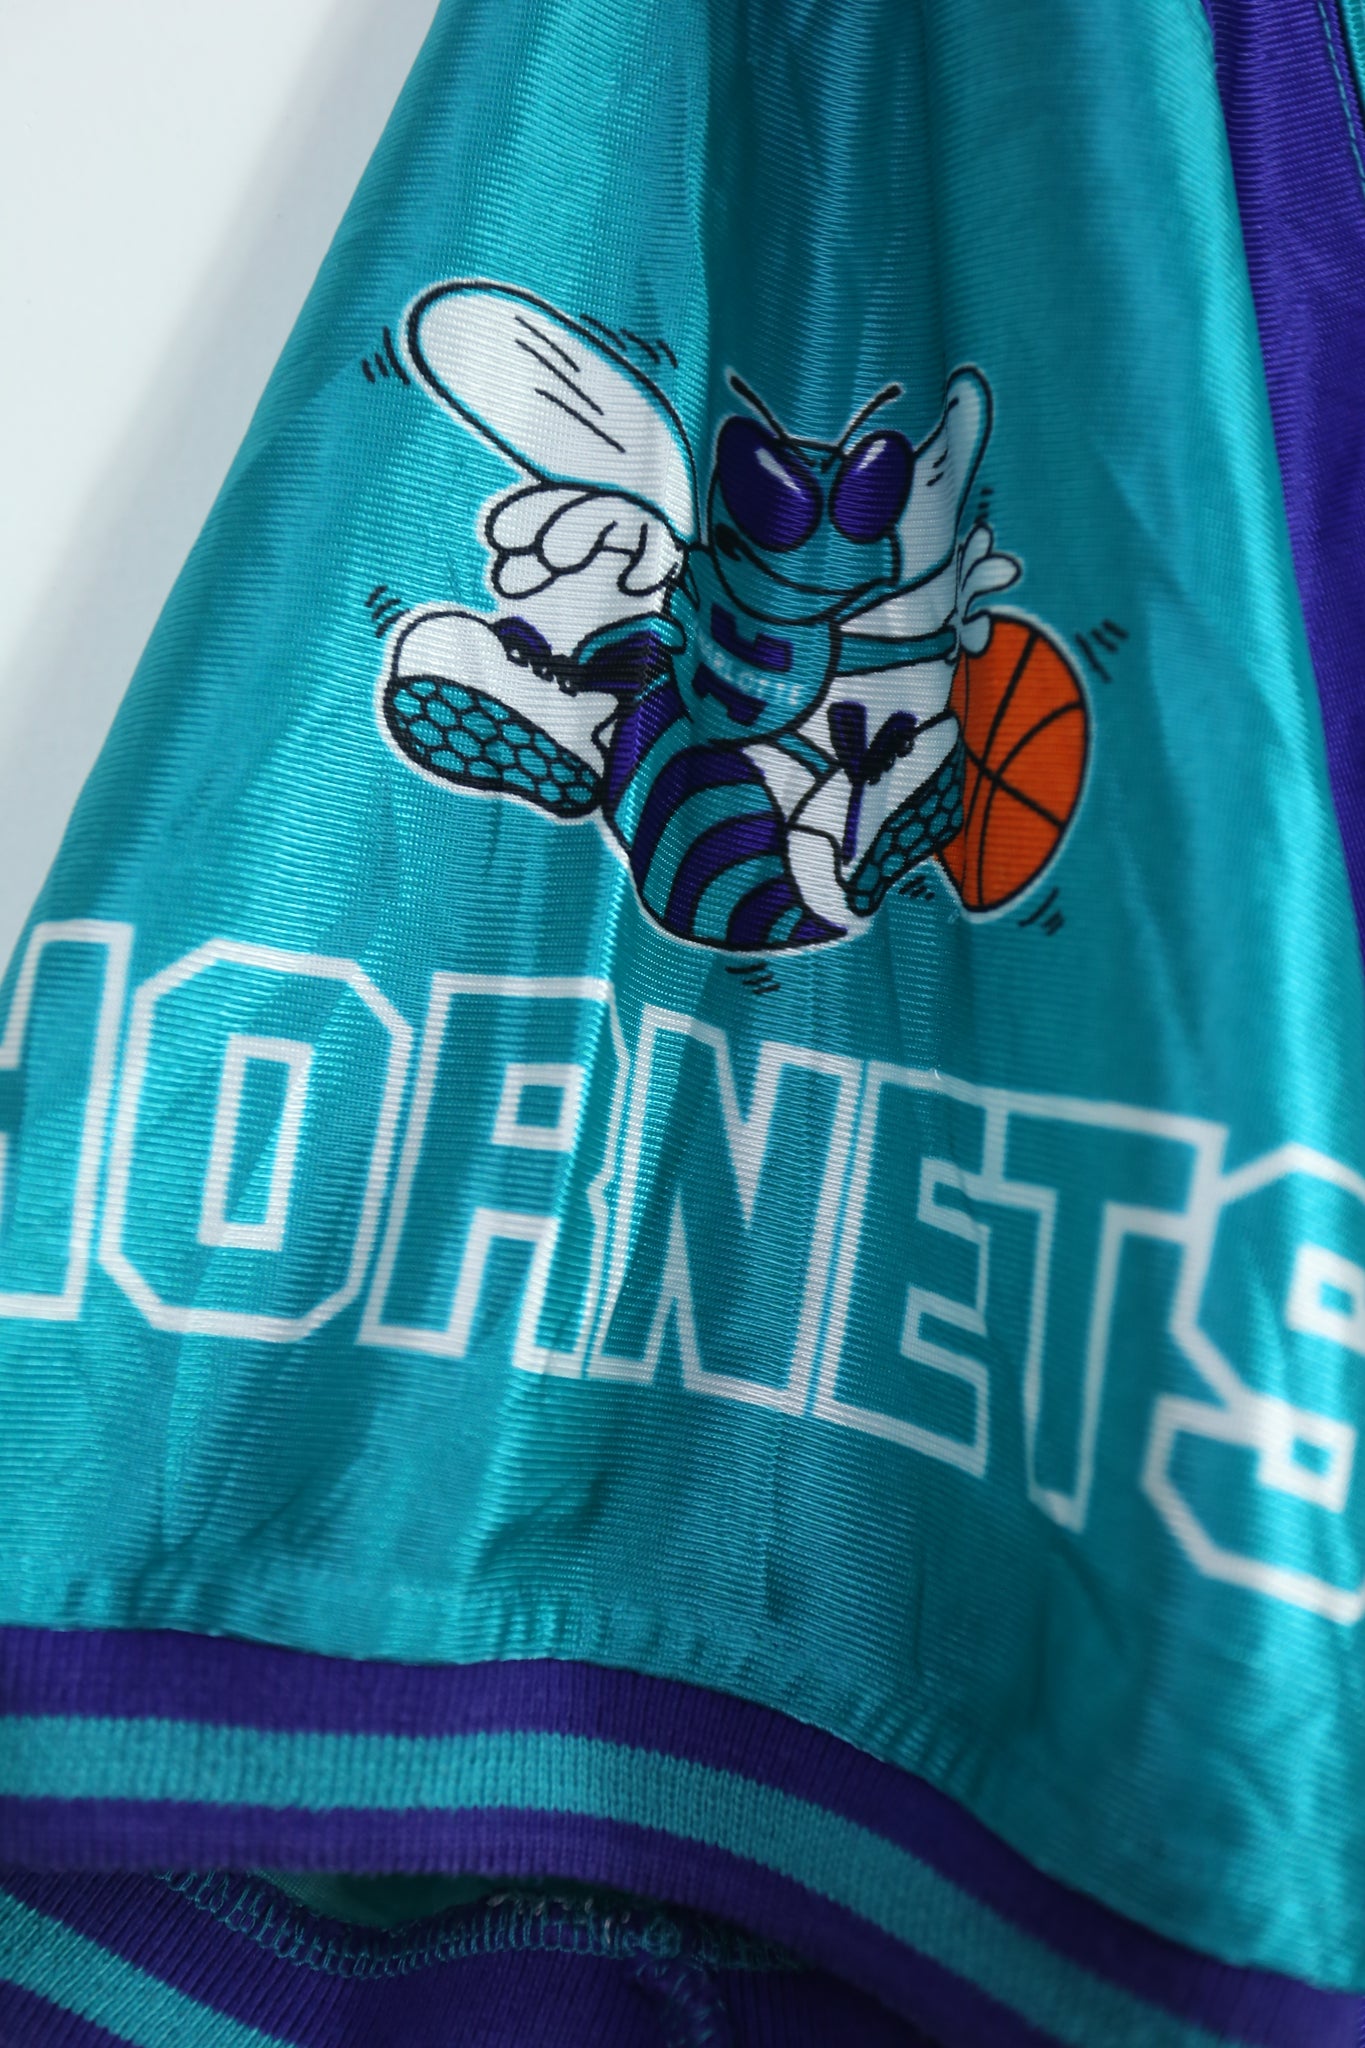 Charlotte+Hornets+Jersey+90s Photos, Download The BEST Free Charlotte+ Hornets+Jersey+90s Stock Photos & HD Images